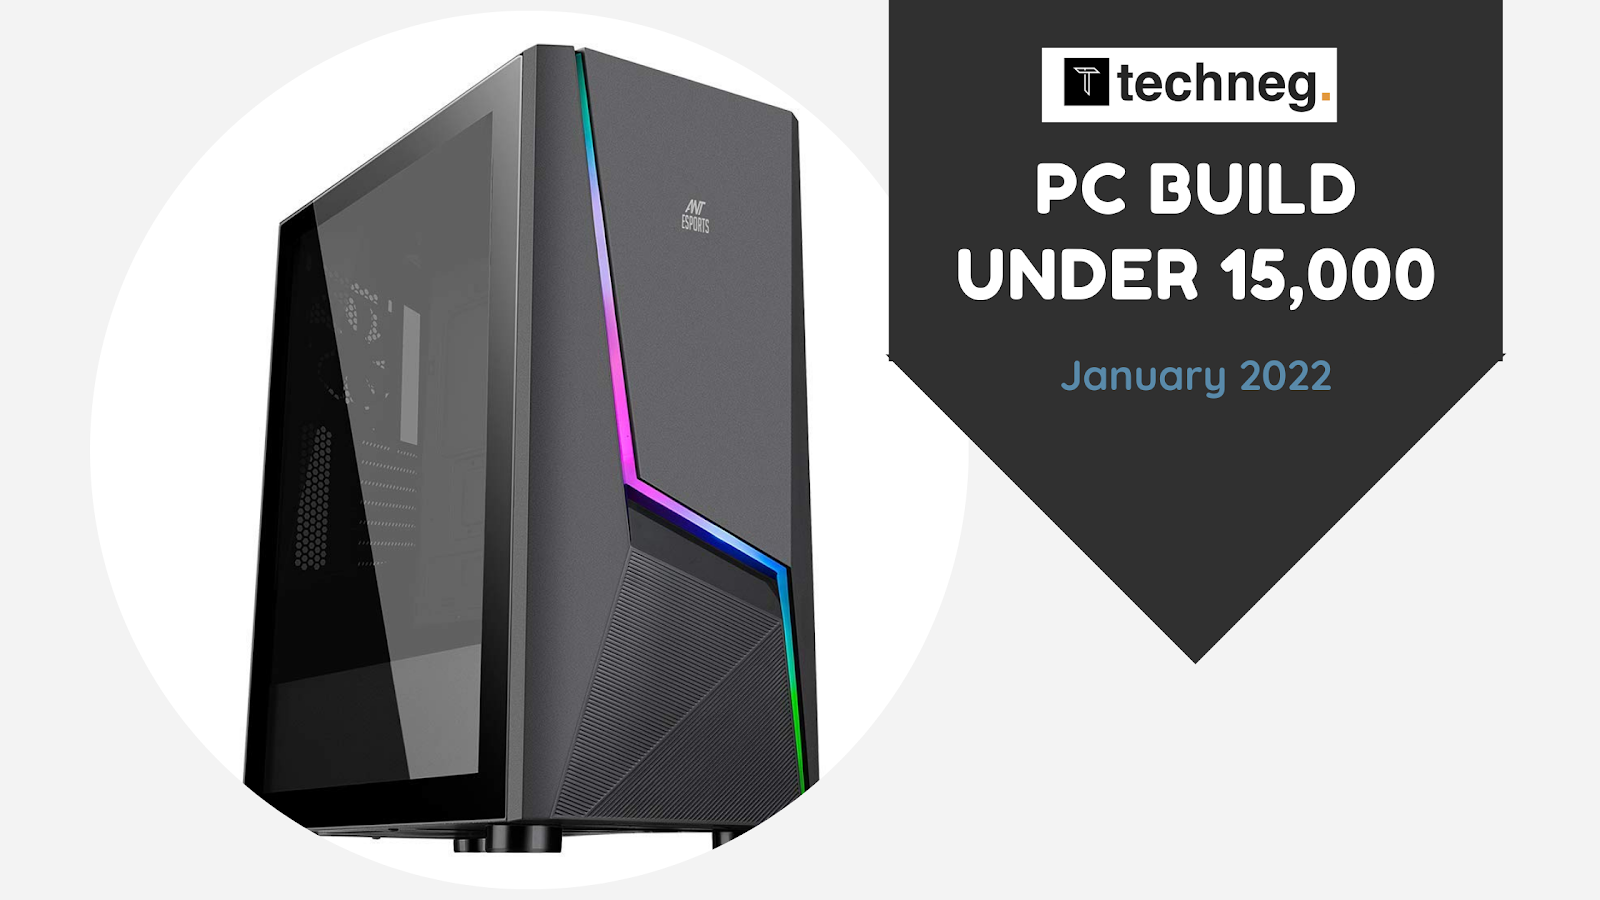 Gaming Pc Build Under 15 000 Rs In January 22 Techneg